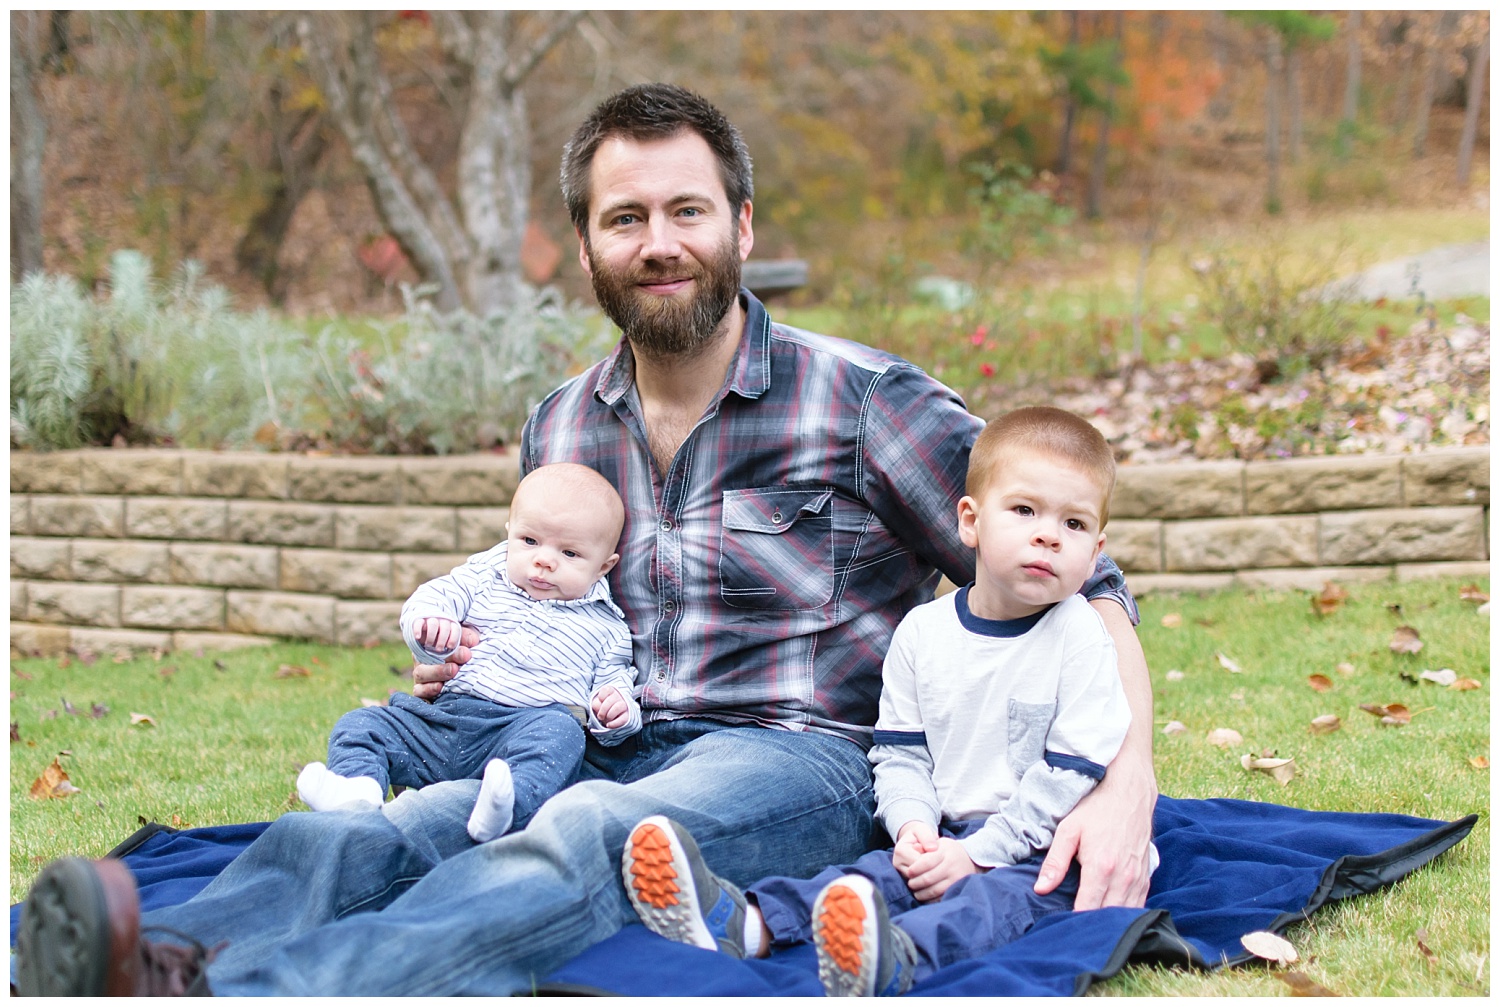 this is an image of the boys of the family during a lifestyle family session in marietta georgia. the image contains the father and the two young boys.